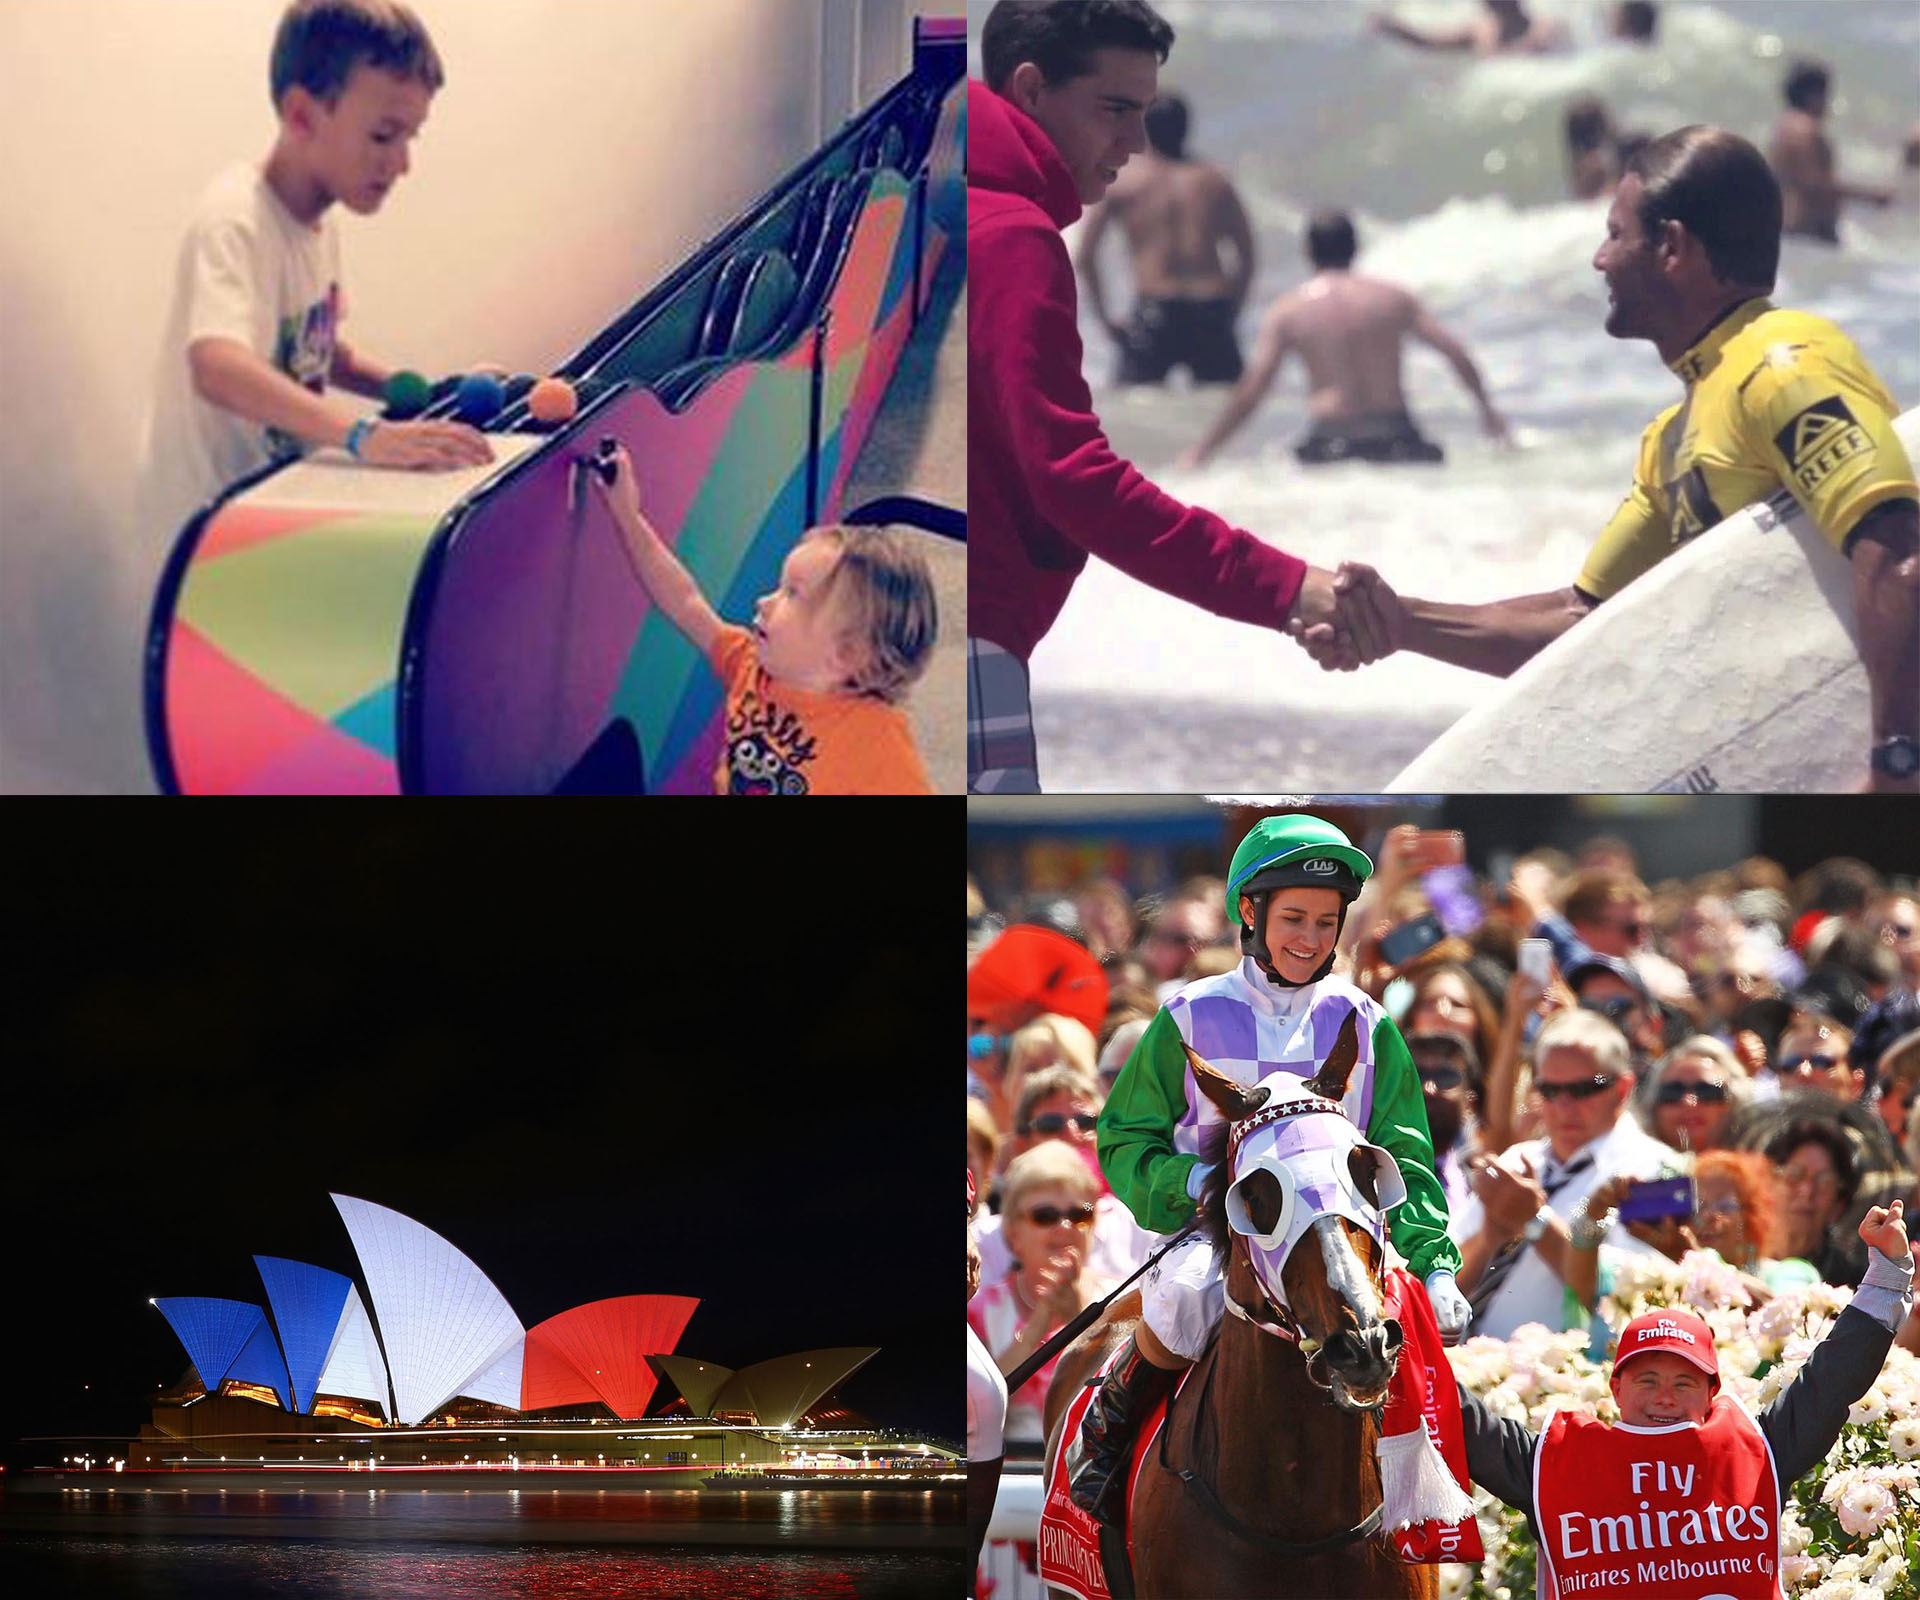 Most heartwarming moments of 2015